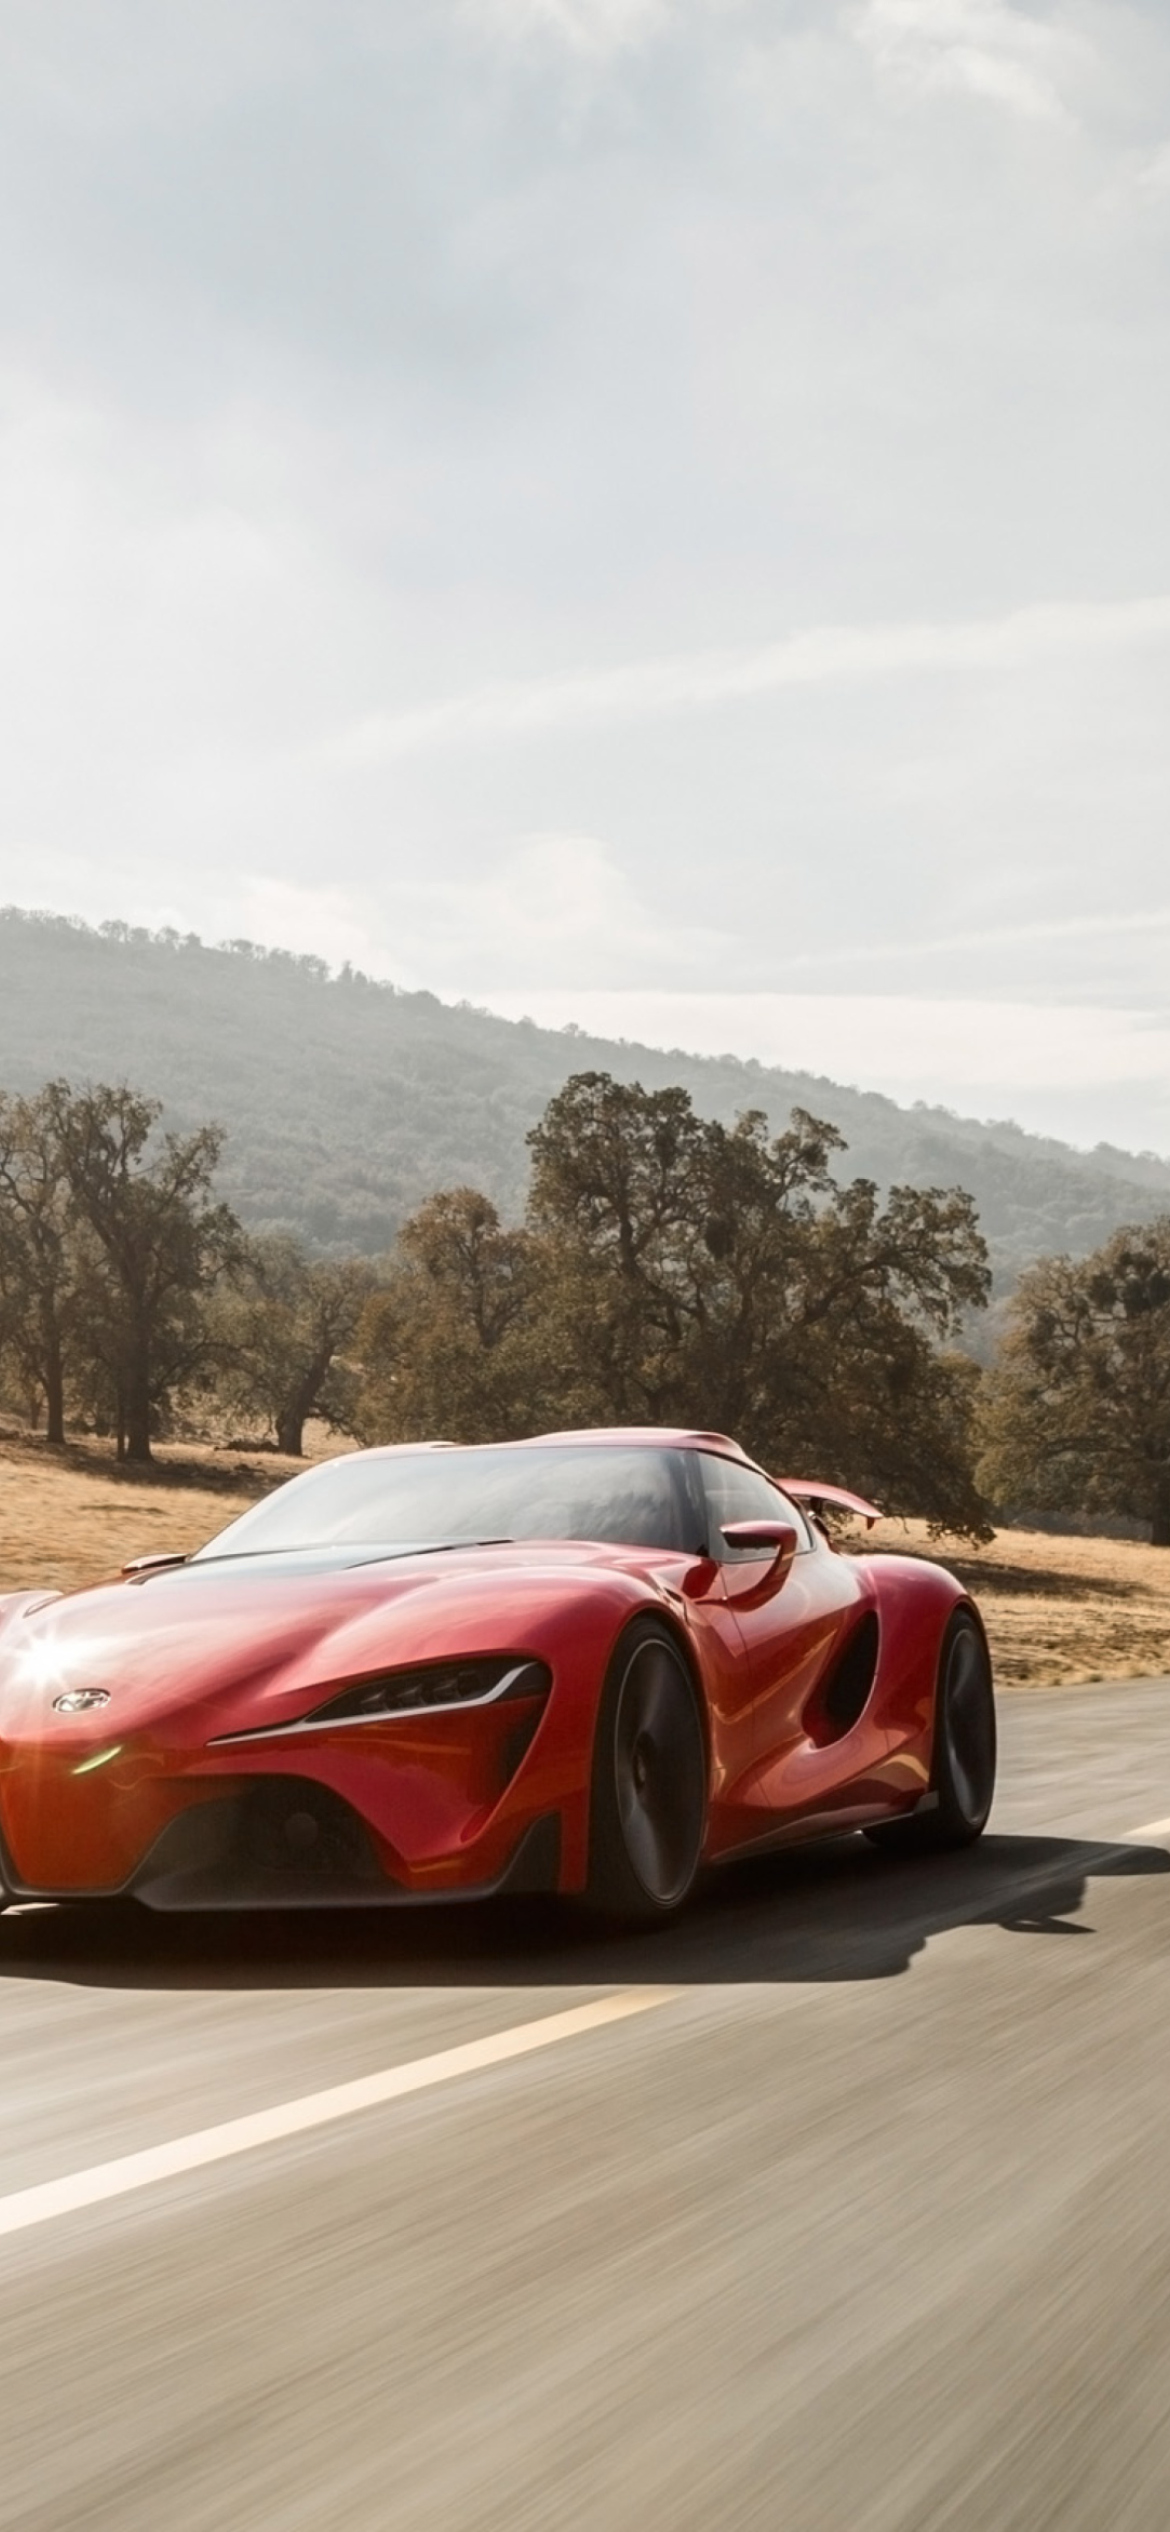 Das 2014 Toyota Ft 1 Concept Front Angle Wallpaper 1170x2532